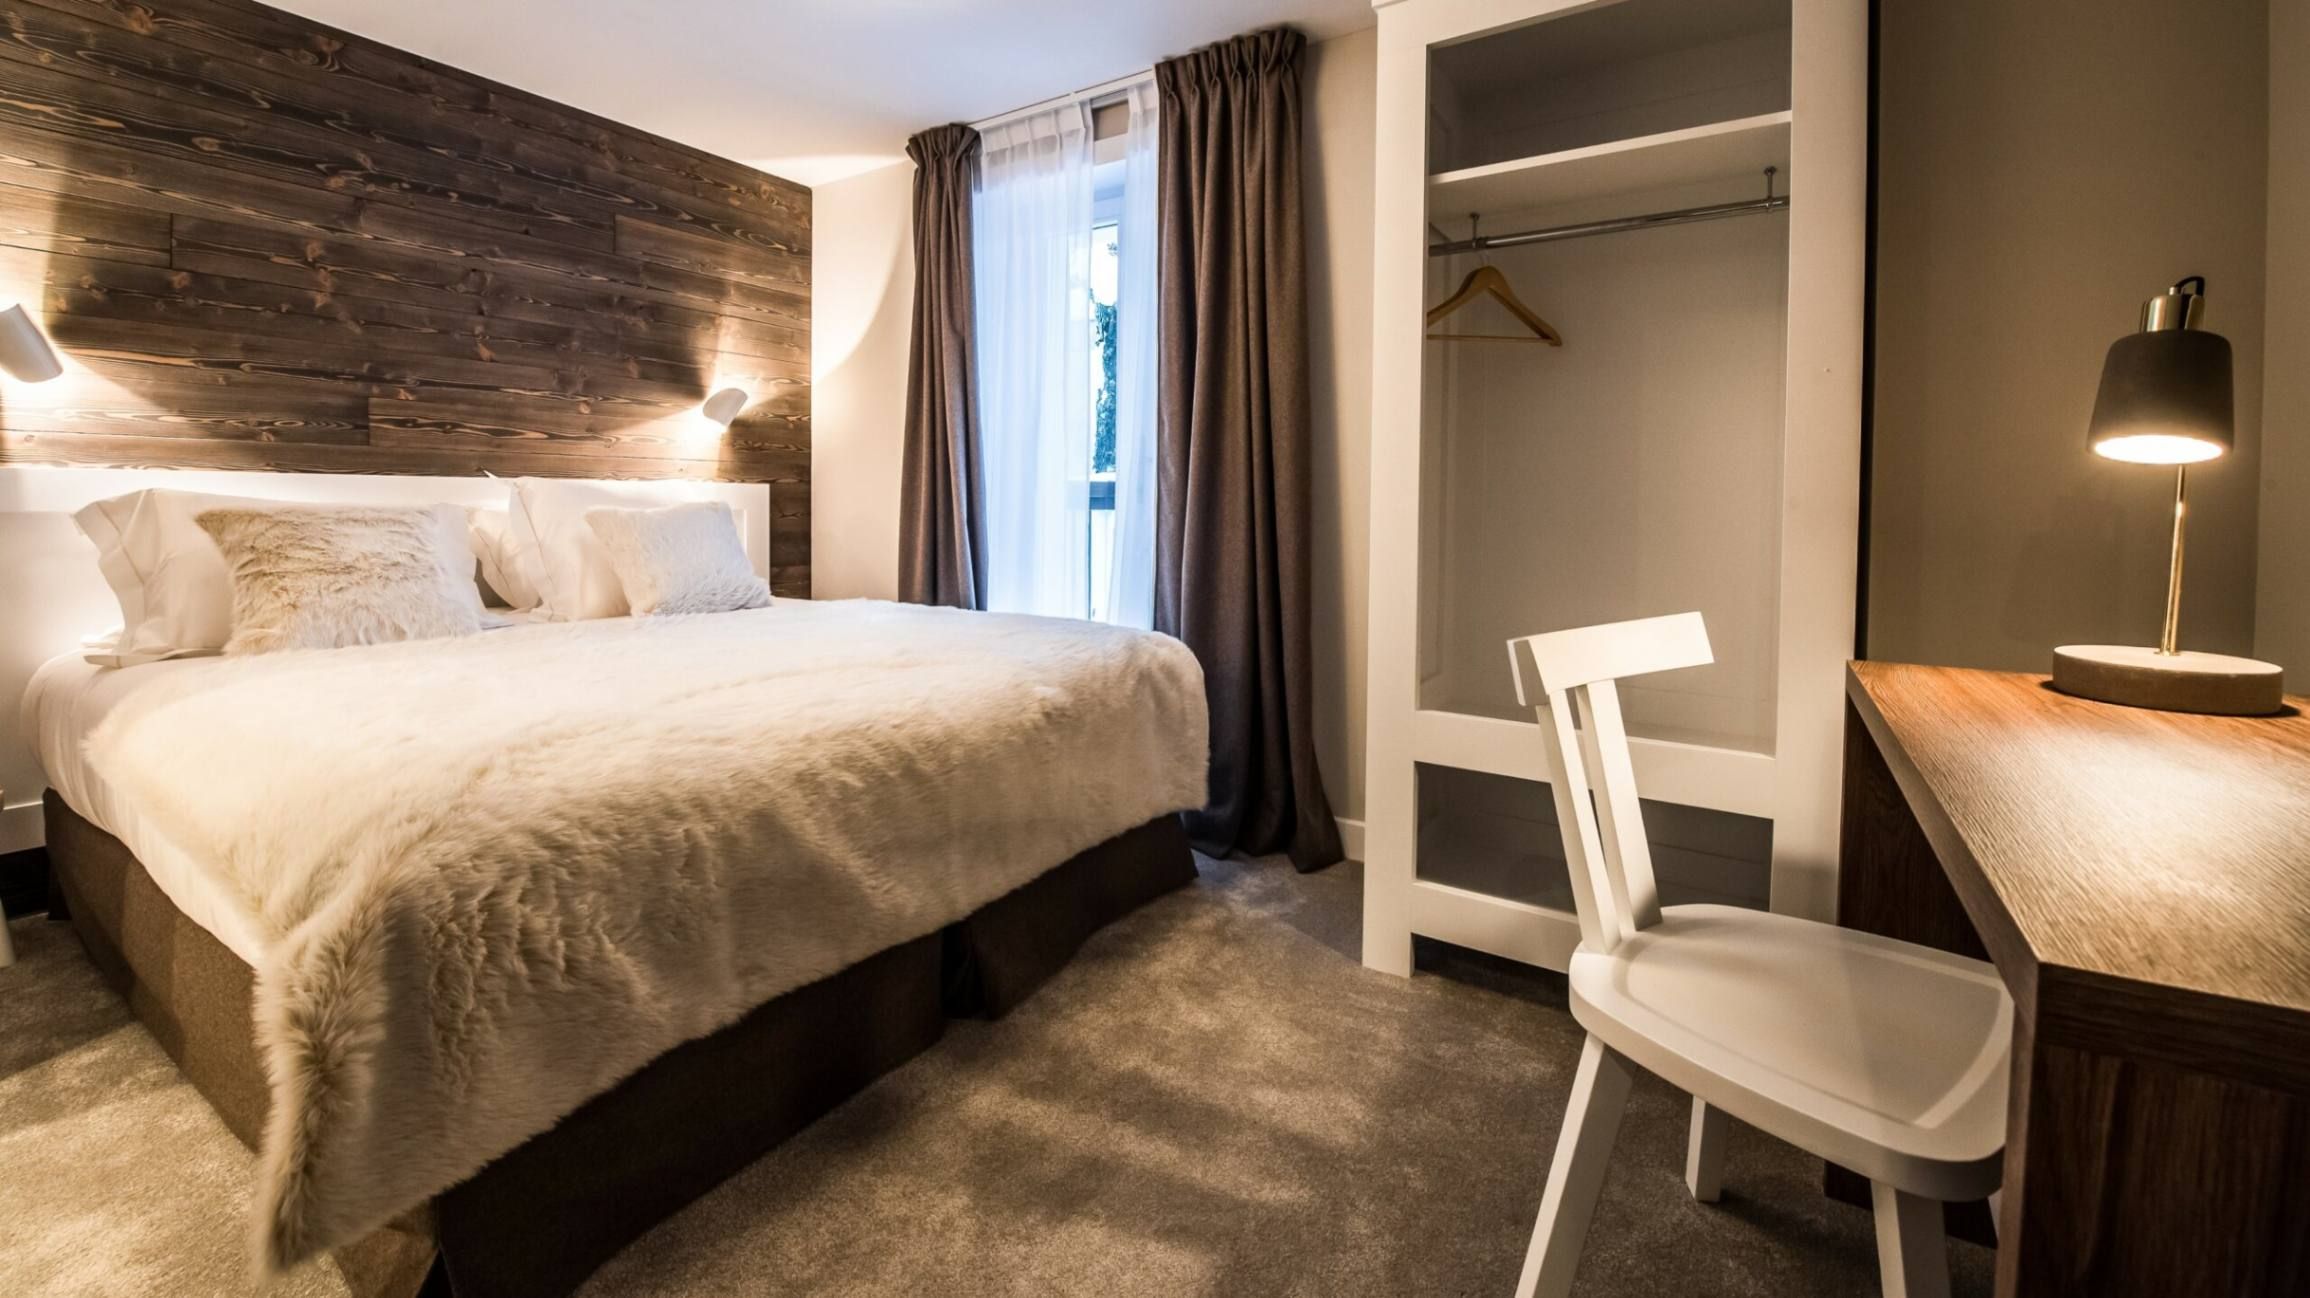 Bright and spacious, superior rooms are the perfect place to stay in Chamonix